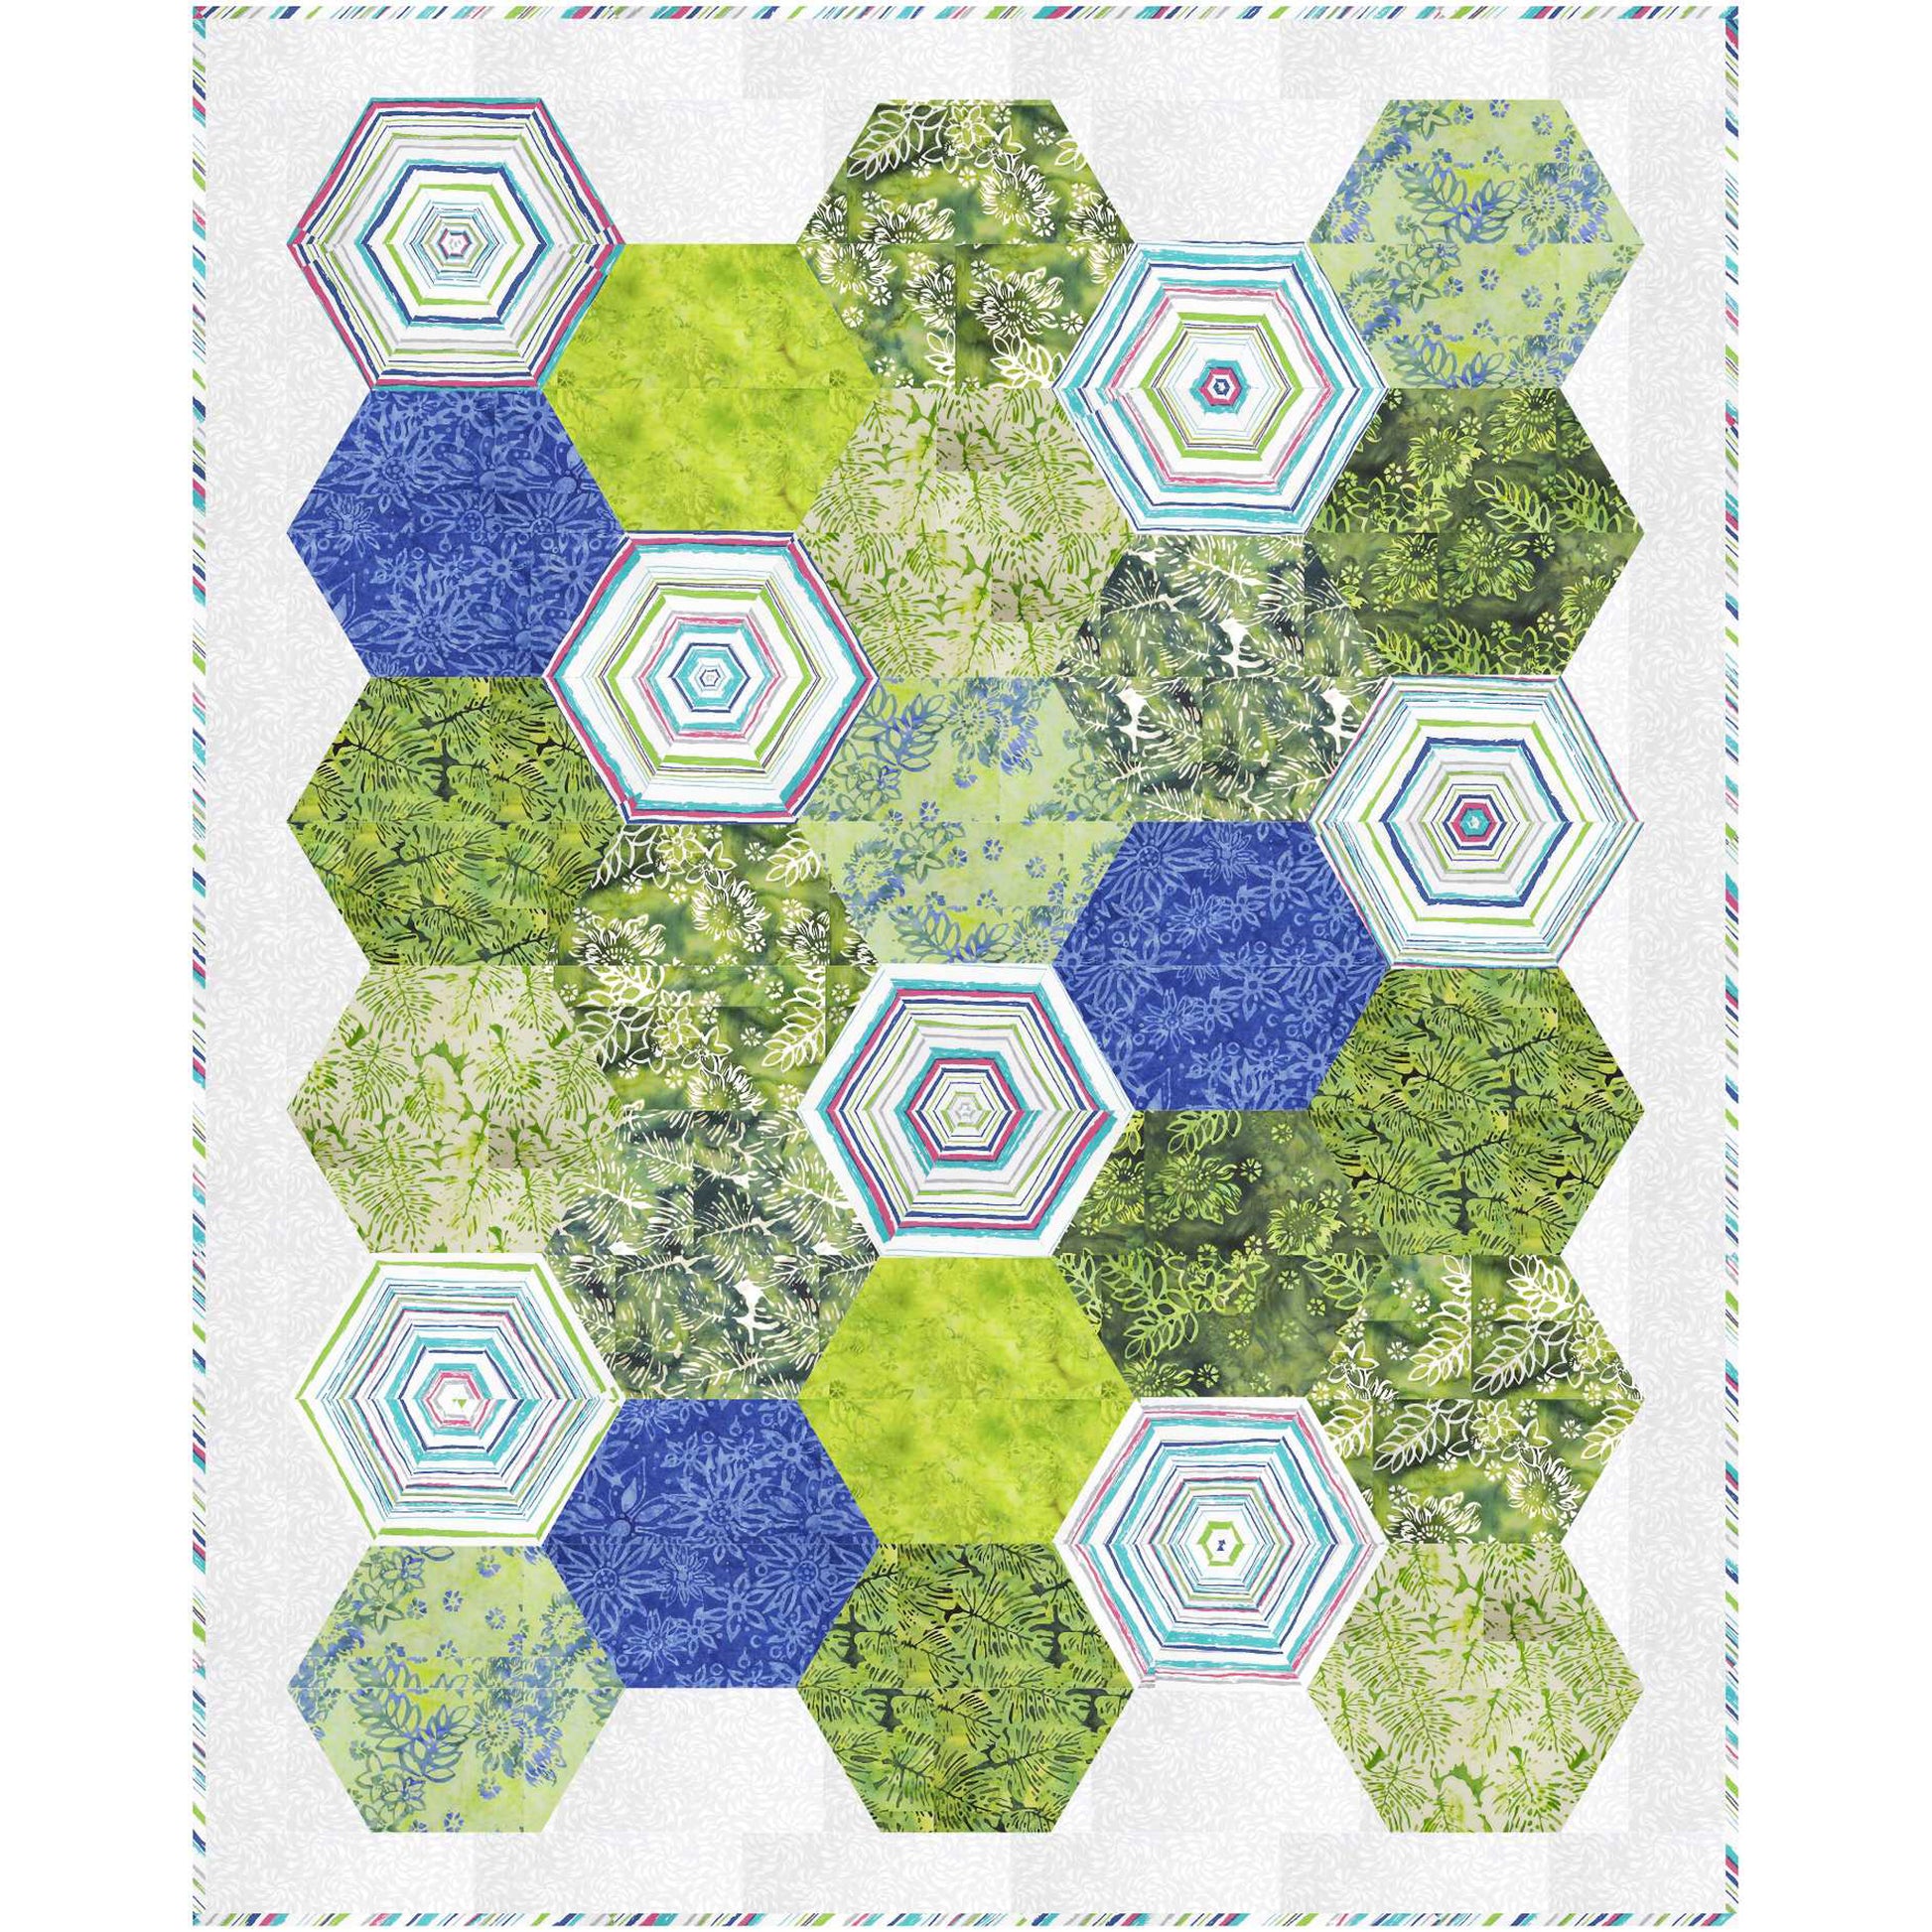 Quilt with blue and green hexagon design.